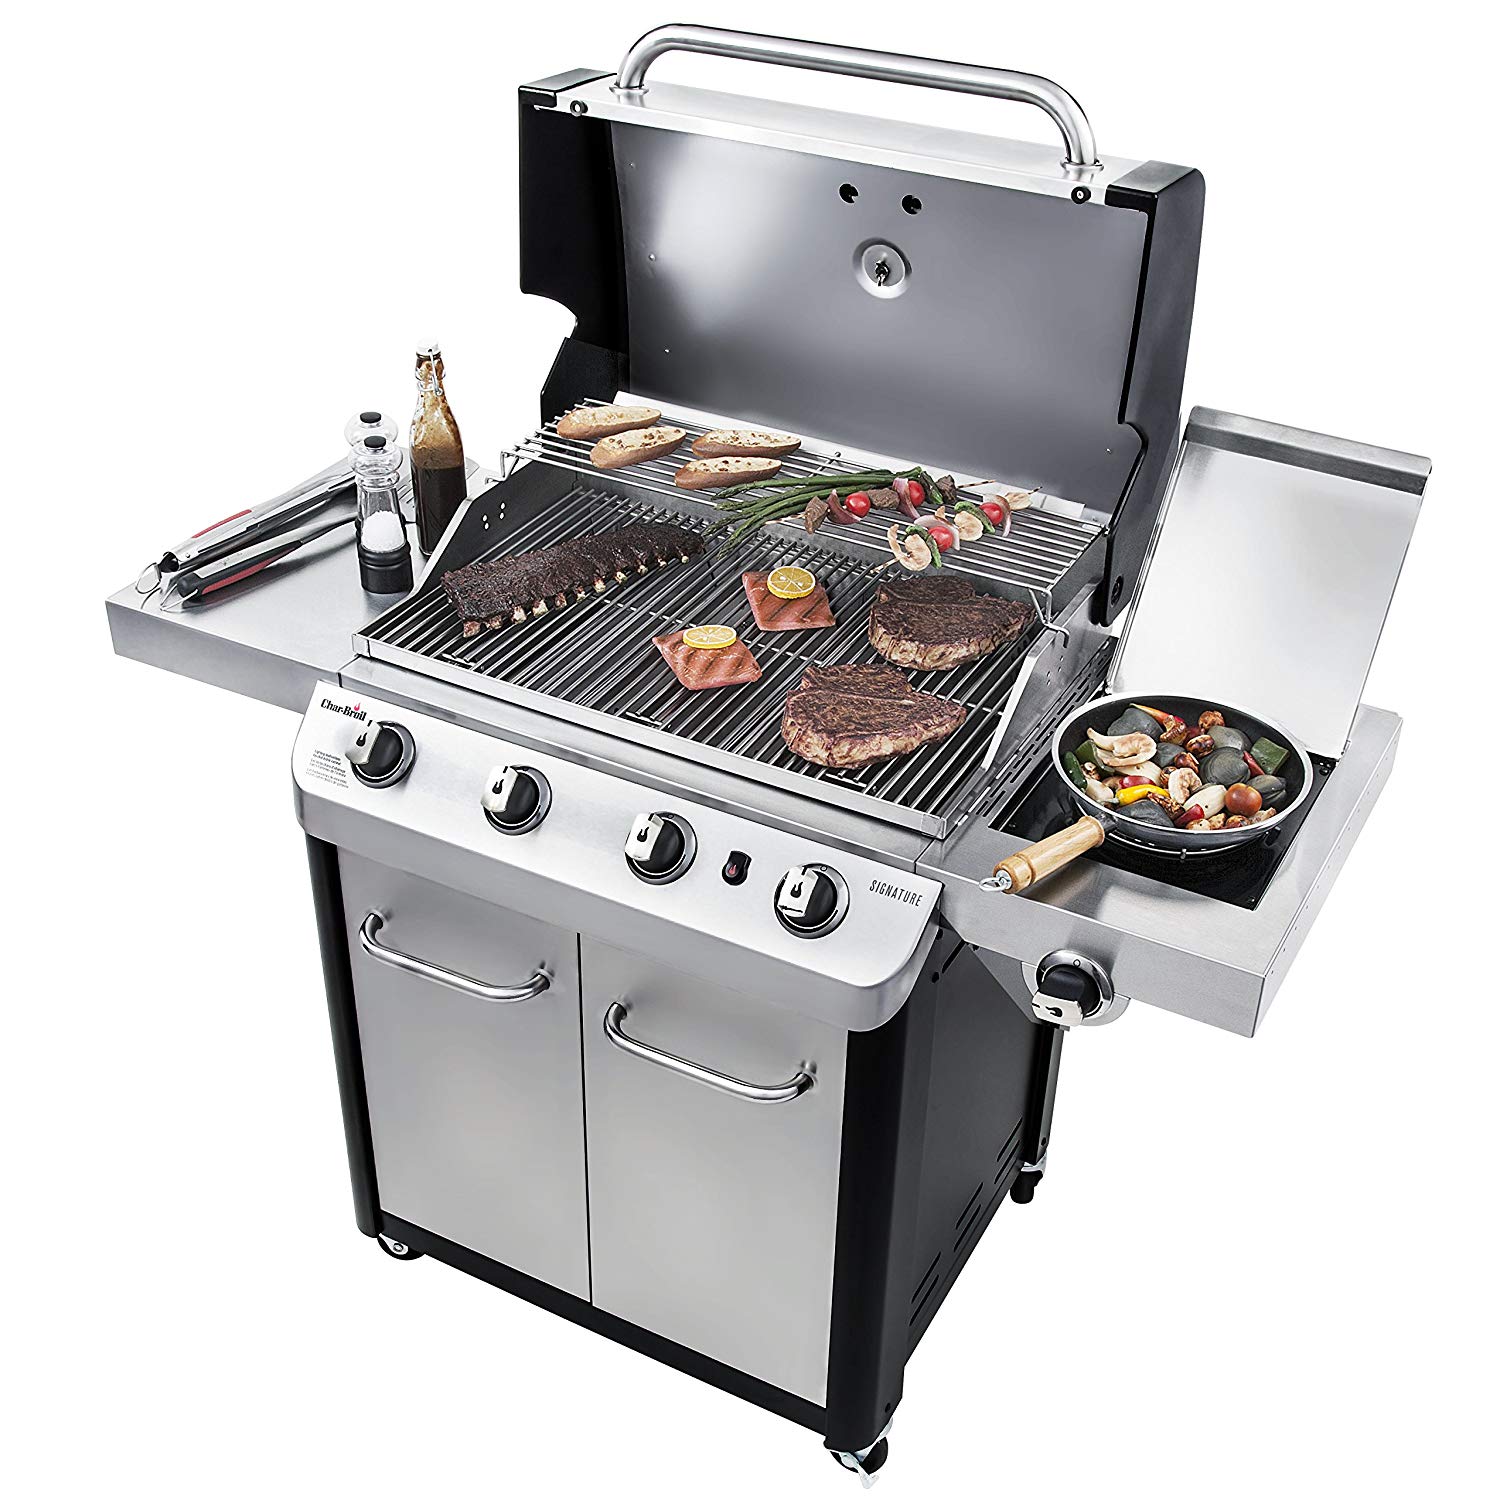 BBQ Gas Grill Clearance - Buy Electric, Charcoal and Propane Grills At Best Prices